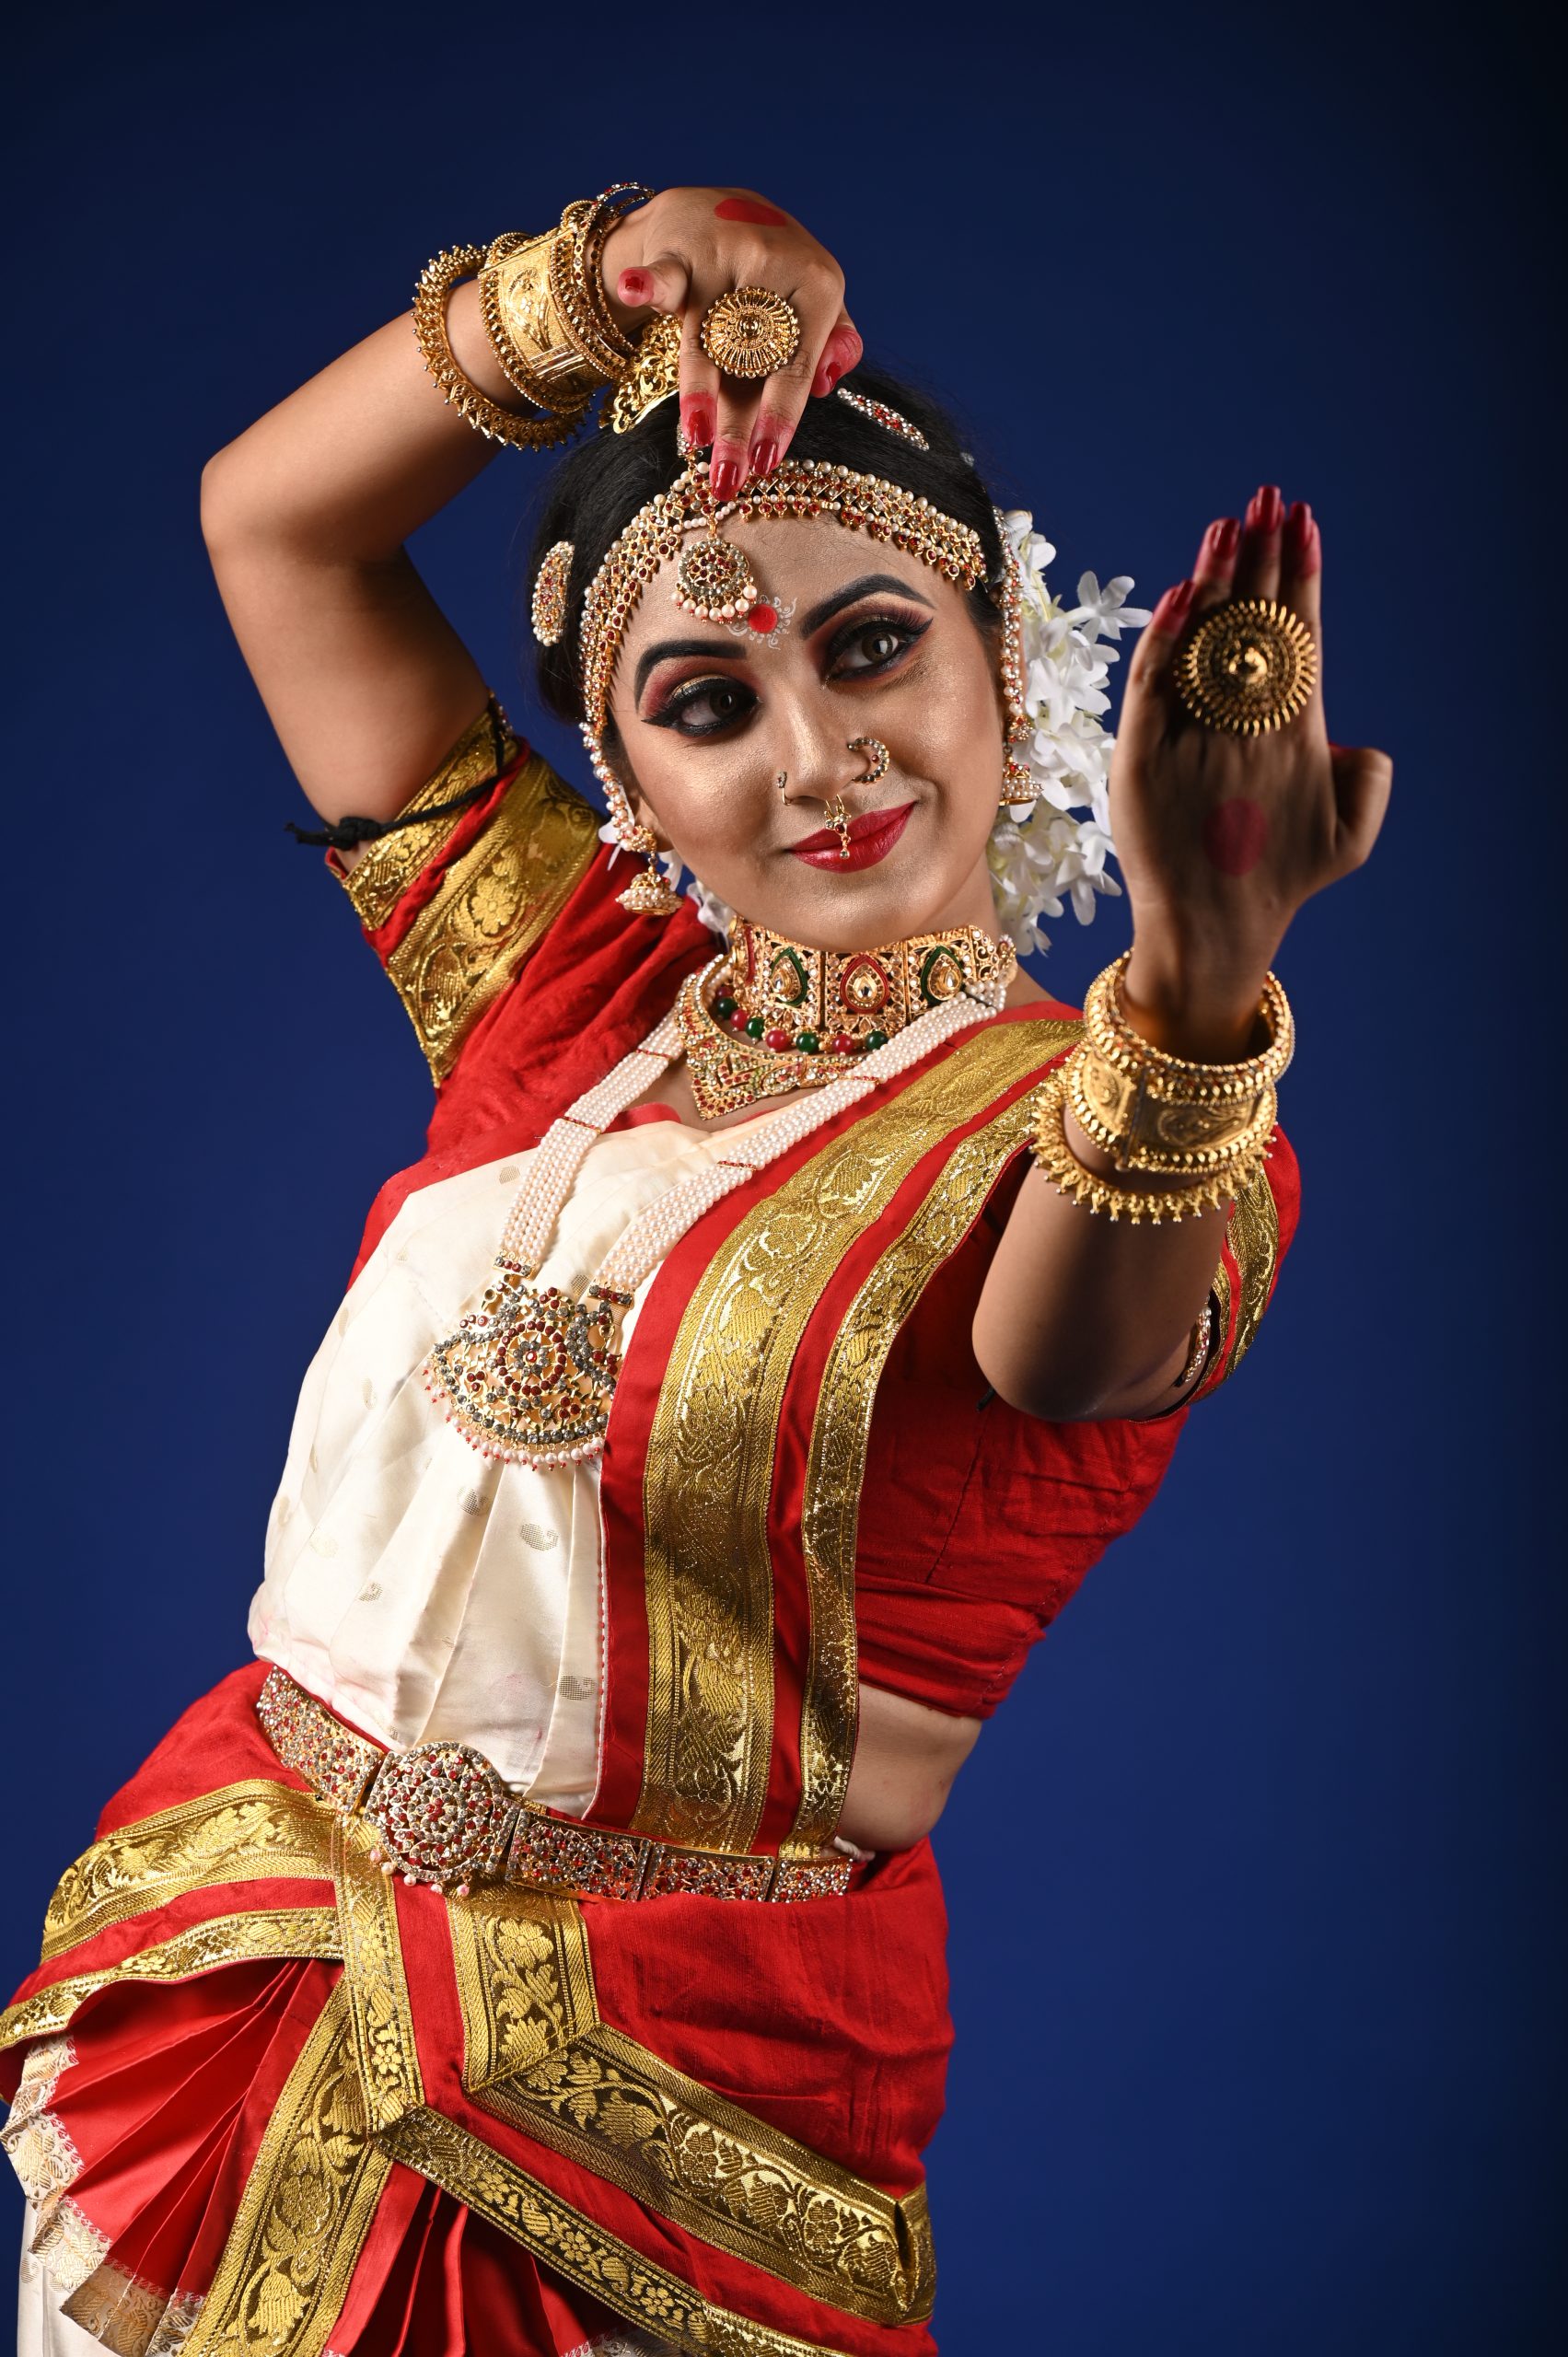 Dancer showing her expressions